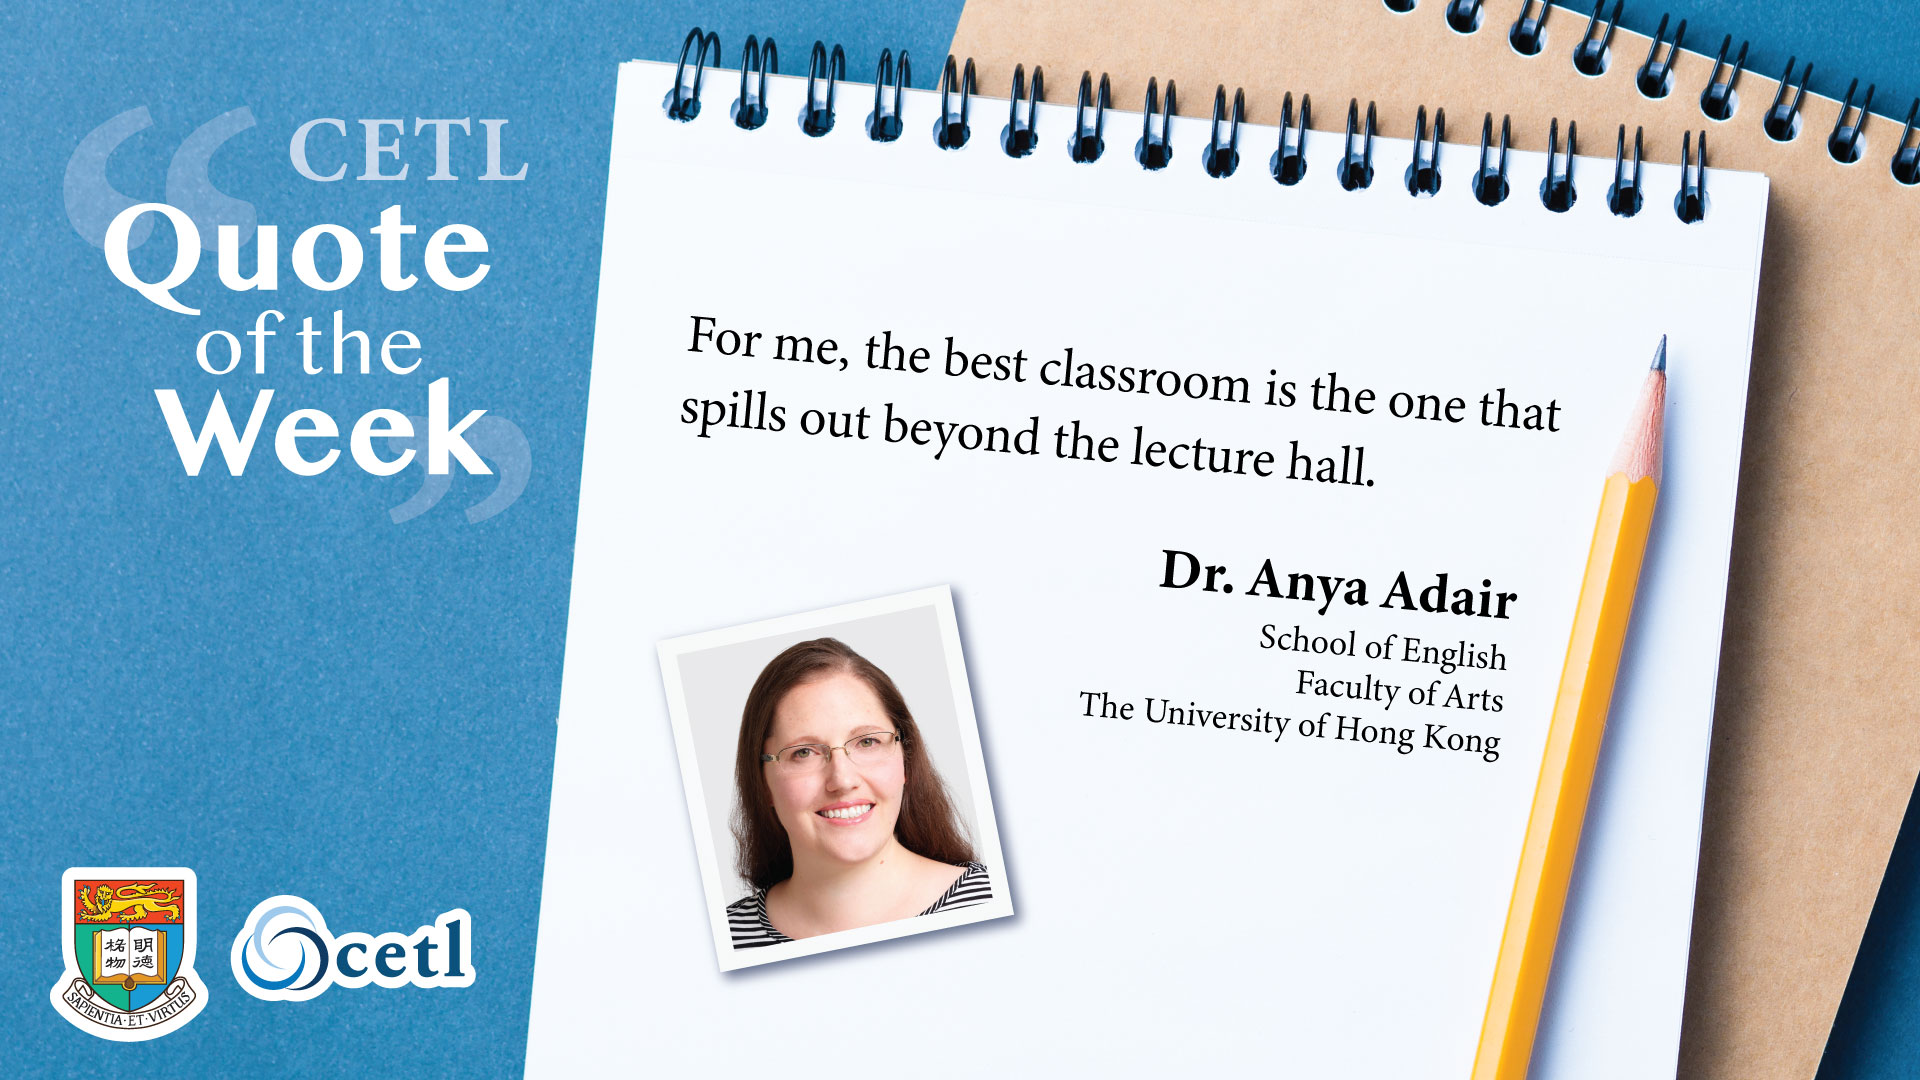 Dr. Anya Adair - For me, the best classroom is the one that spills out beyond the lecture hall.